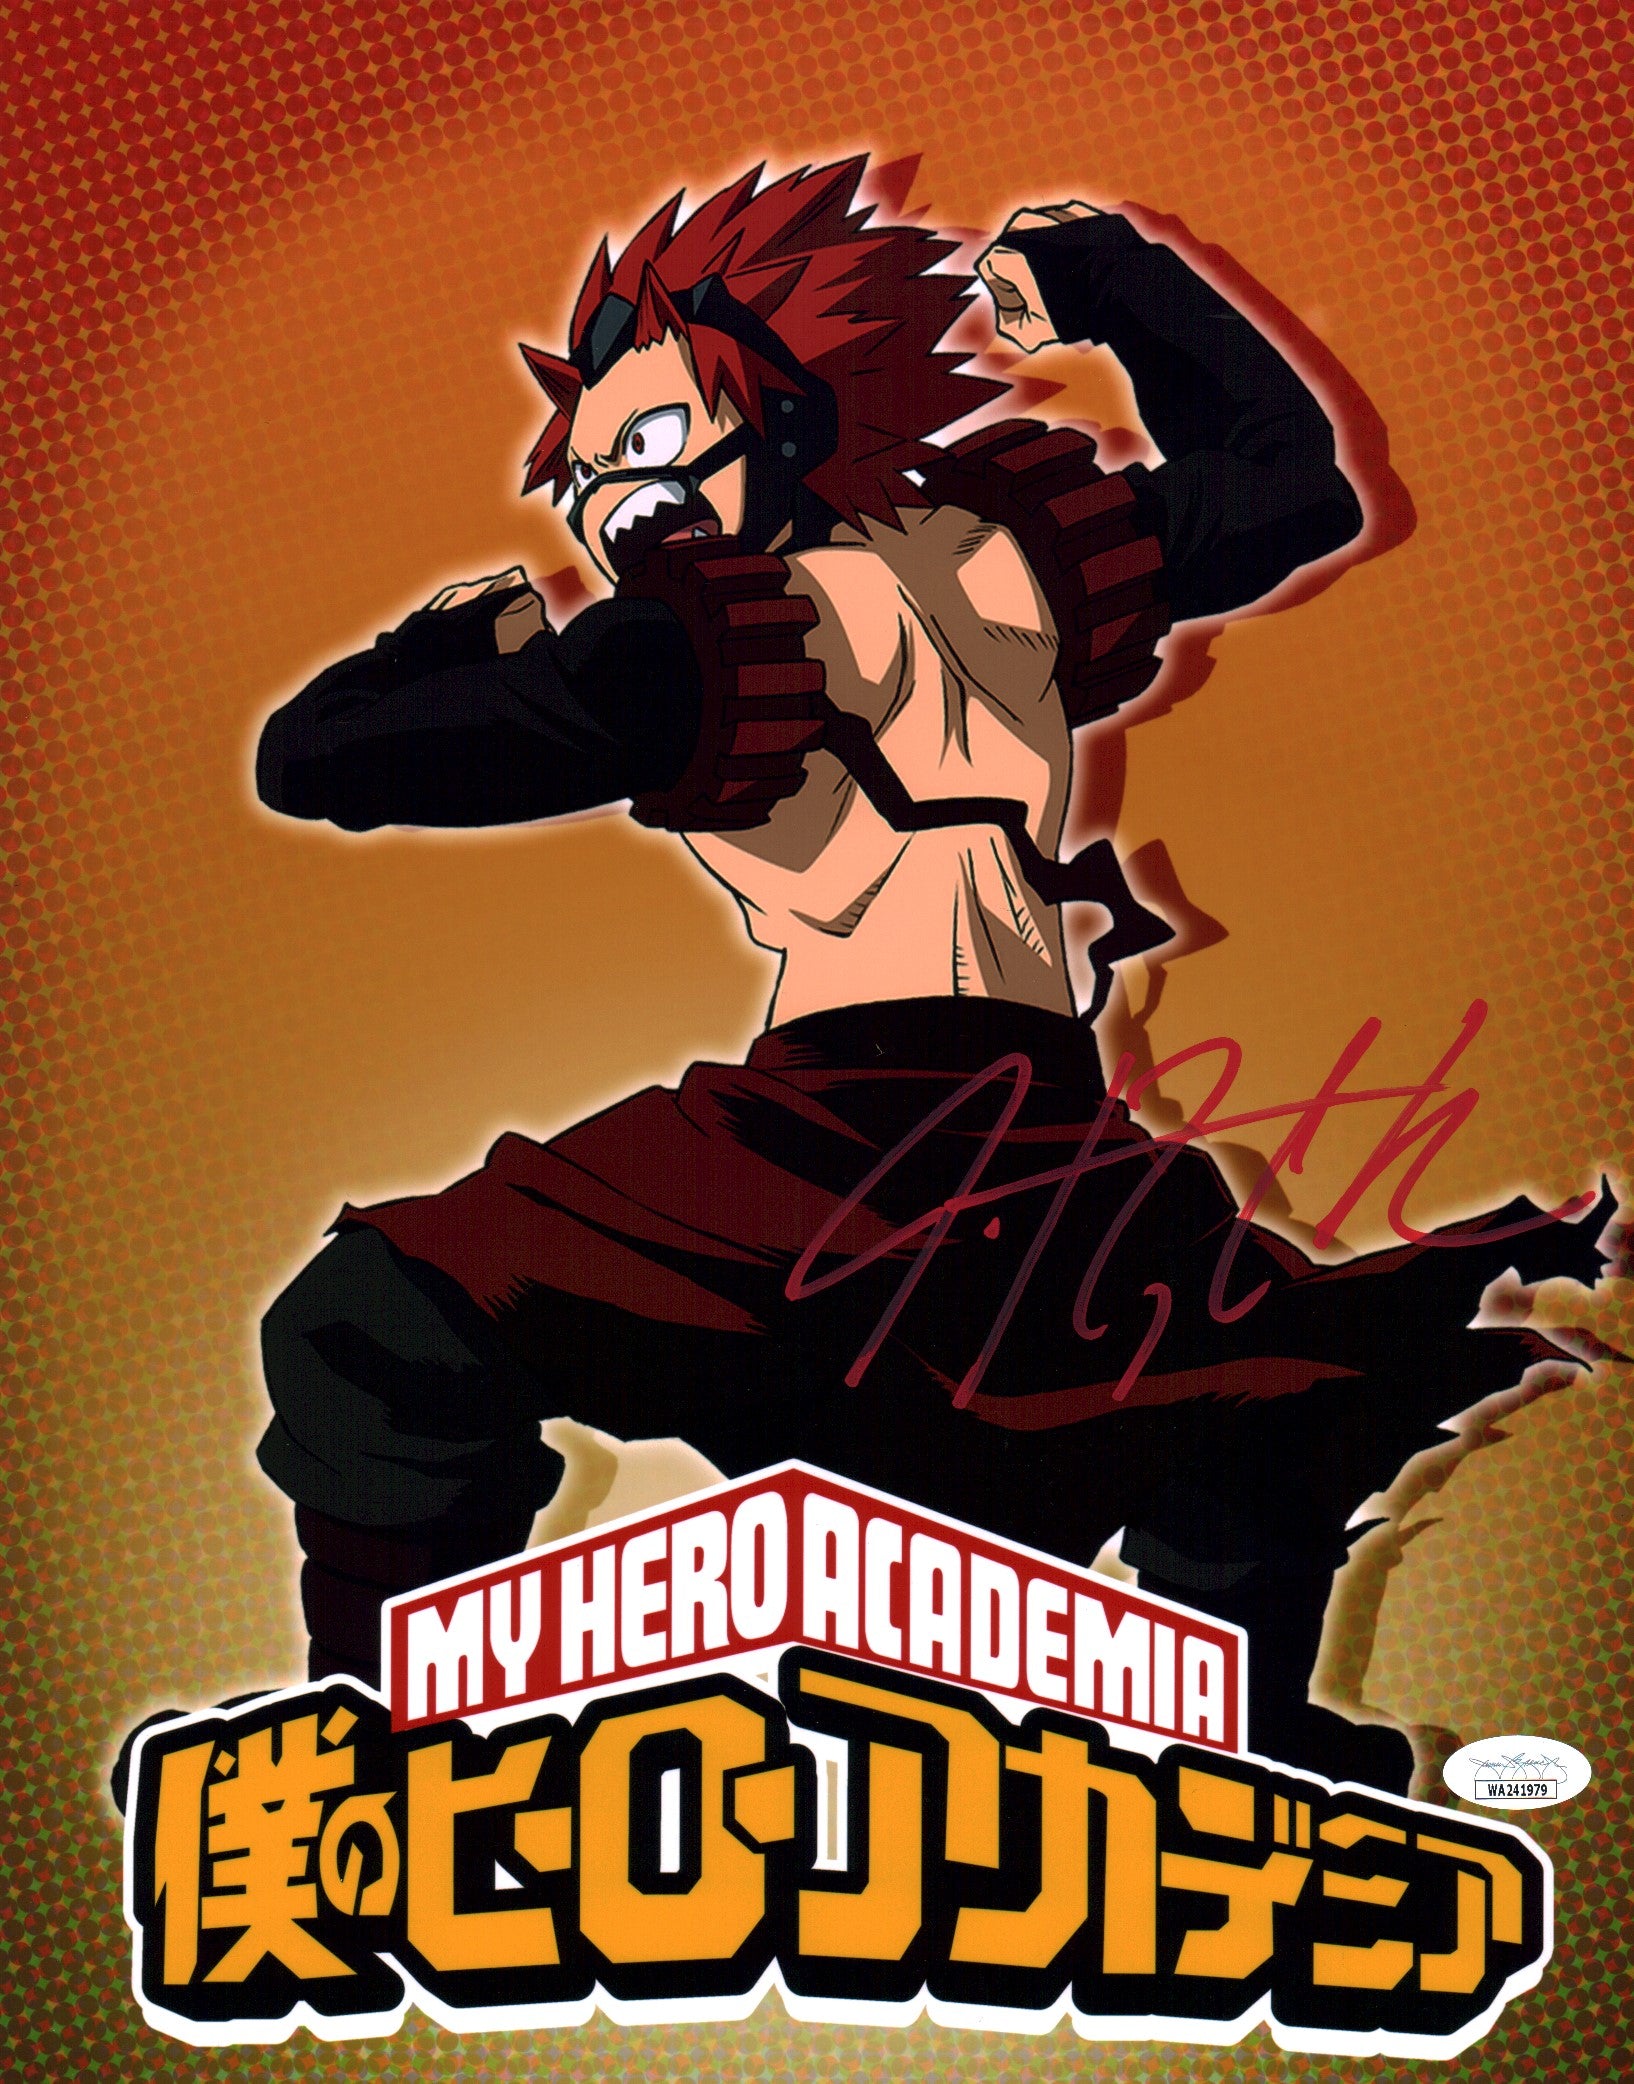 Justin Cook My Hero Academia 11x14 Photo Poster Signed Autographed JSA Certified COA